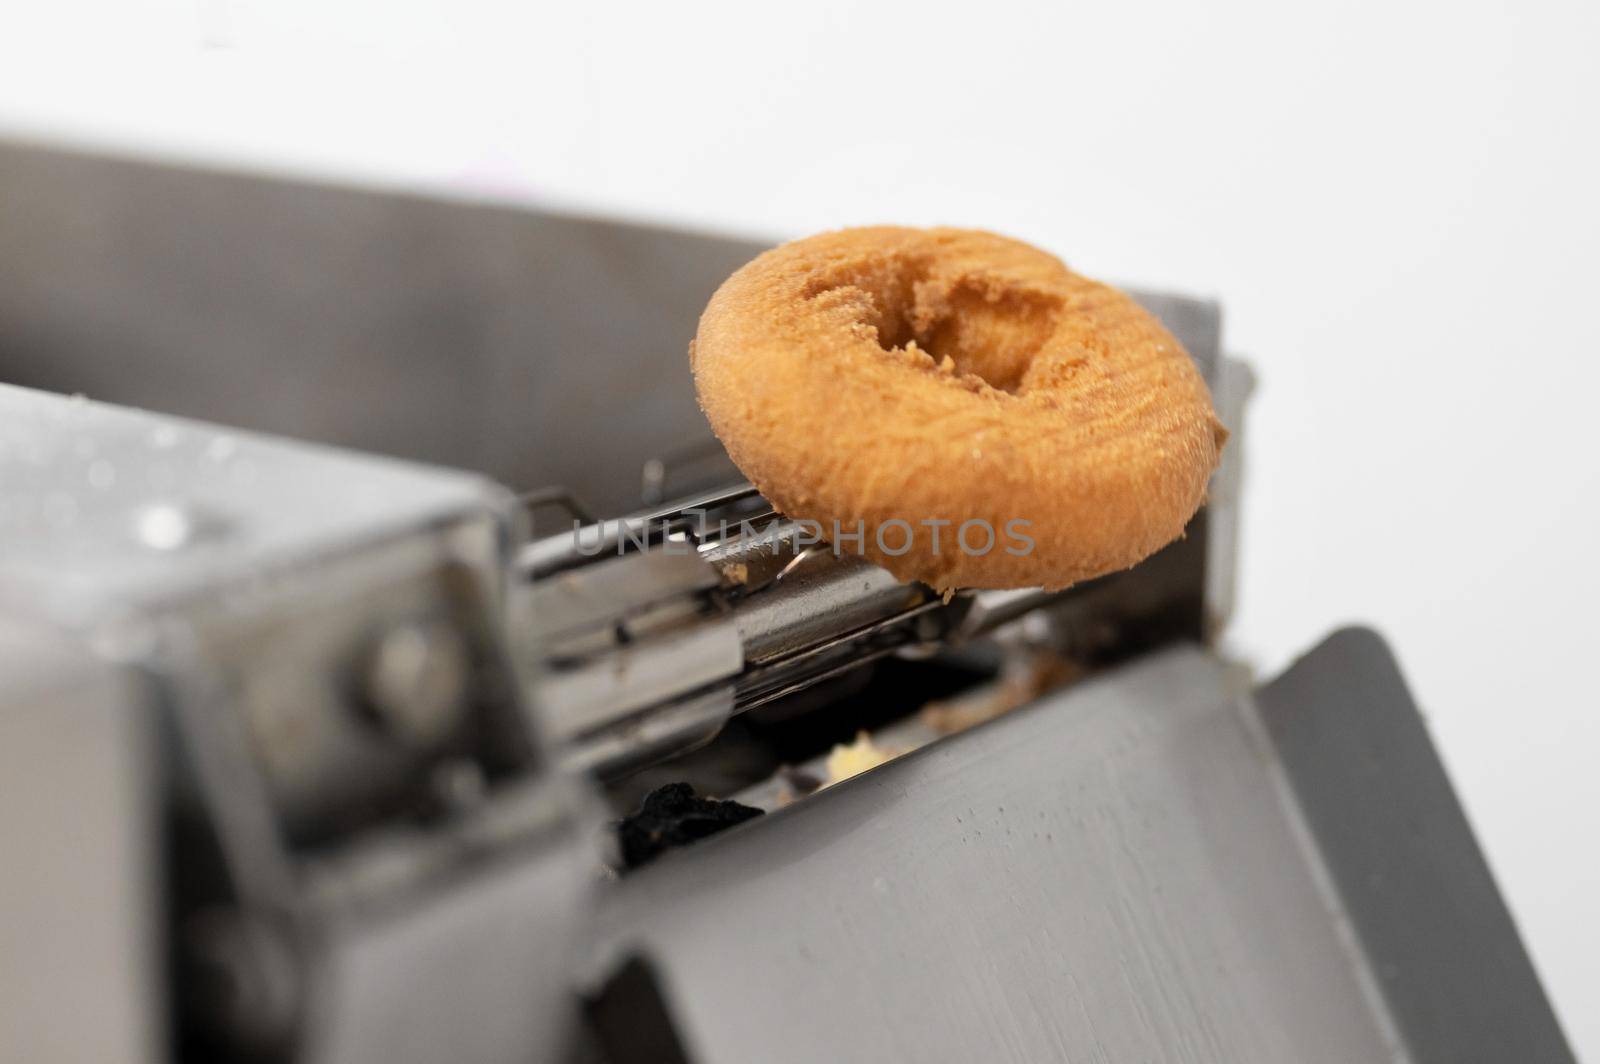 doughnuts or donut on conveyor belt in factory, a type of fried dough confectionery or dessert food. by HERRAEZ